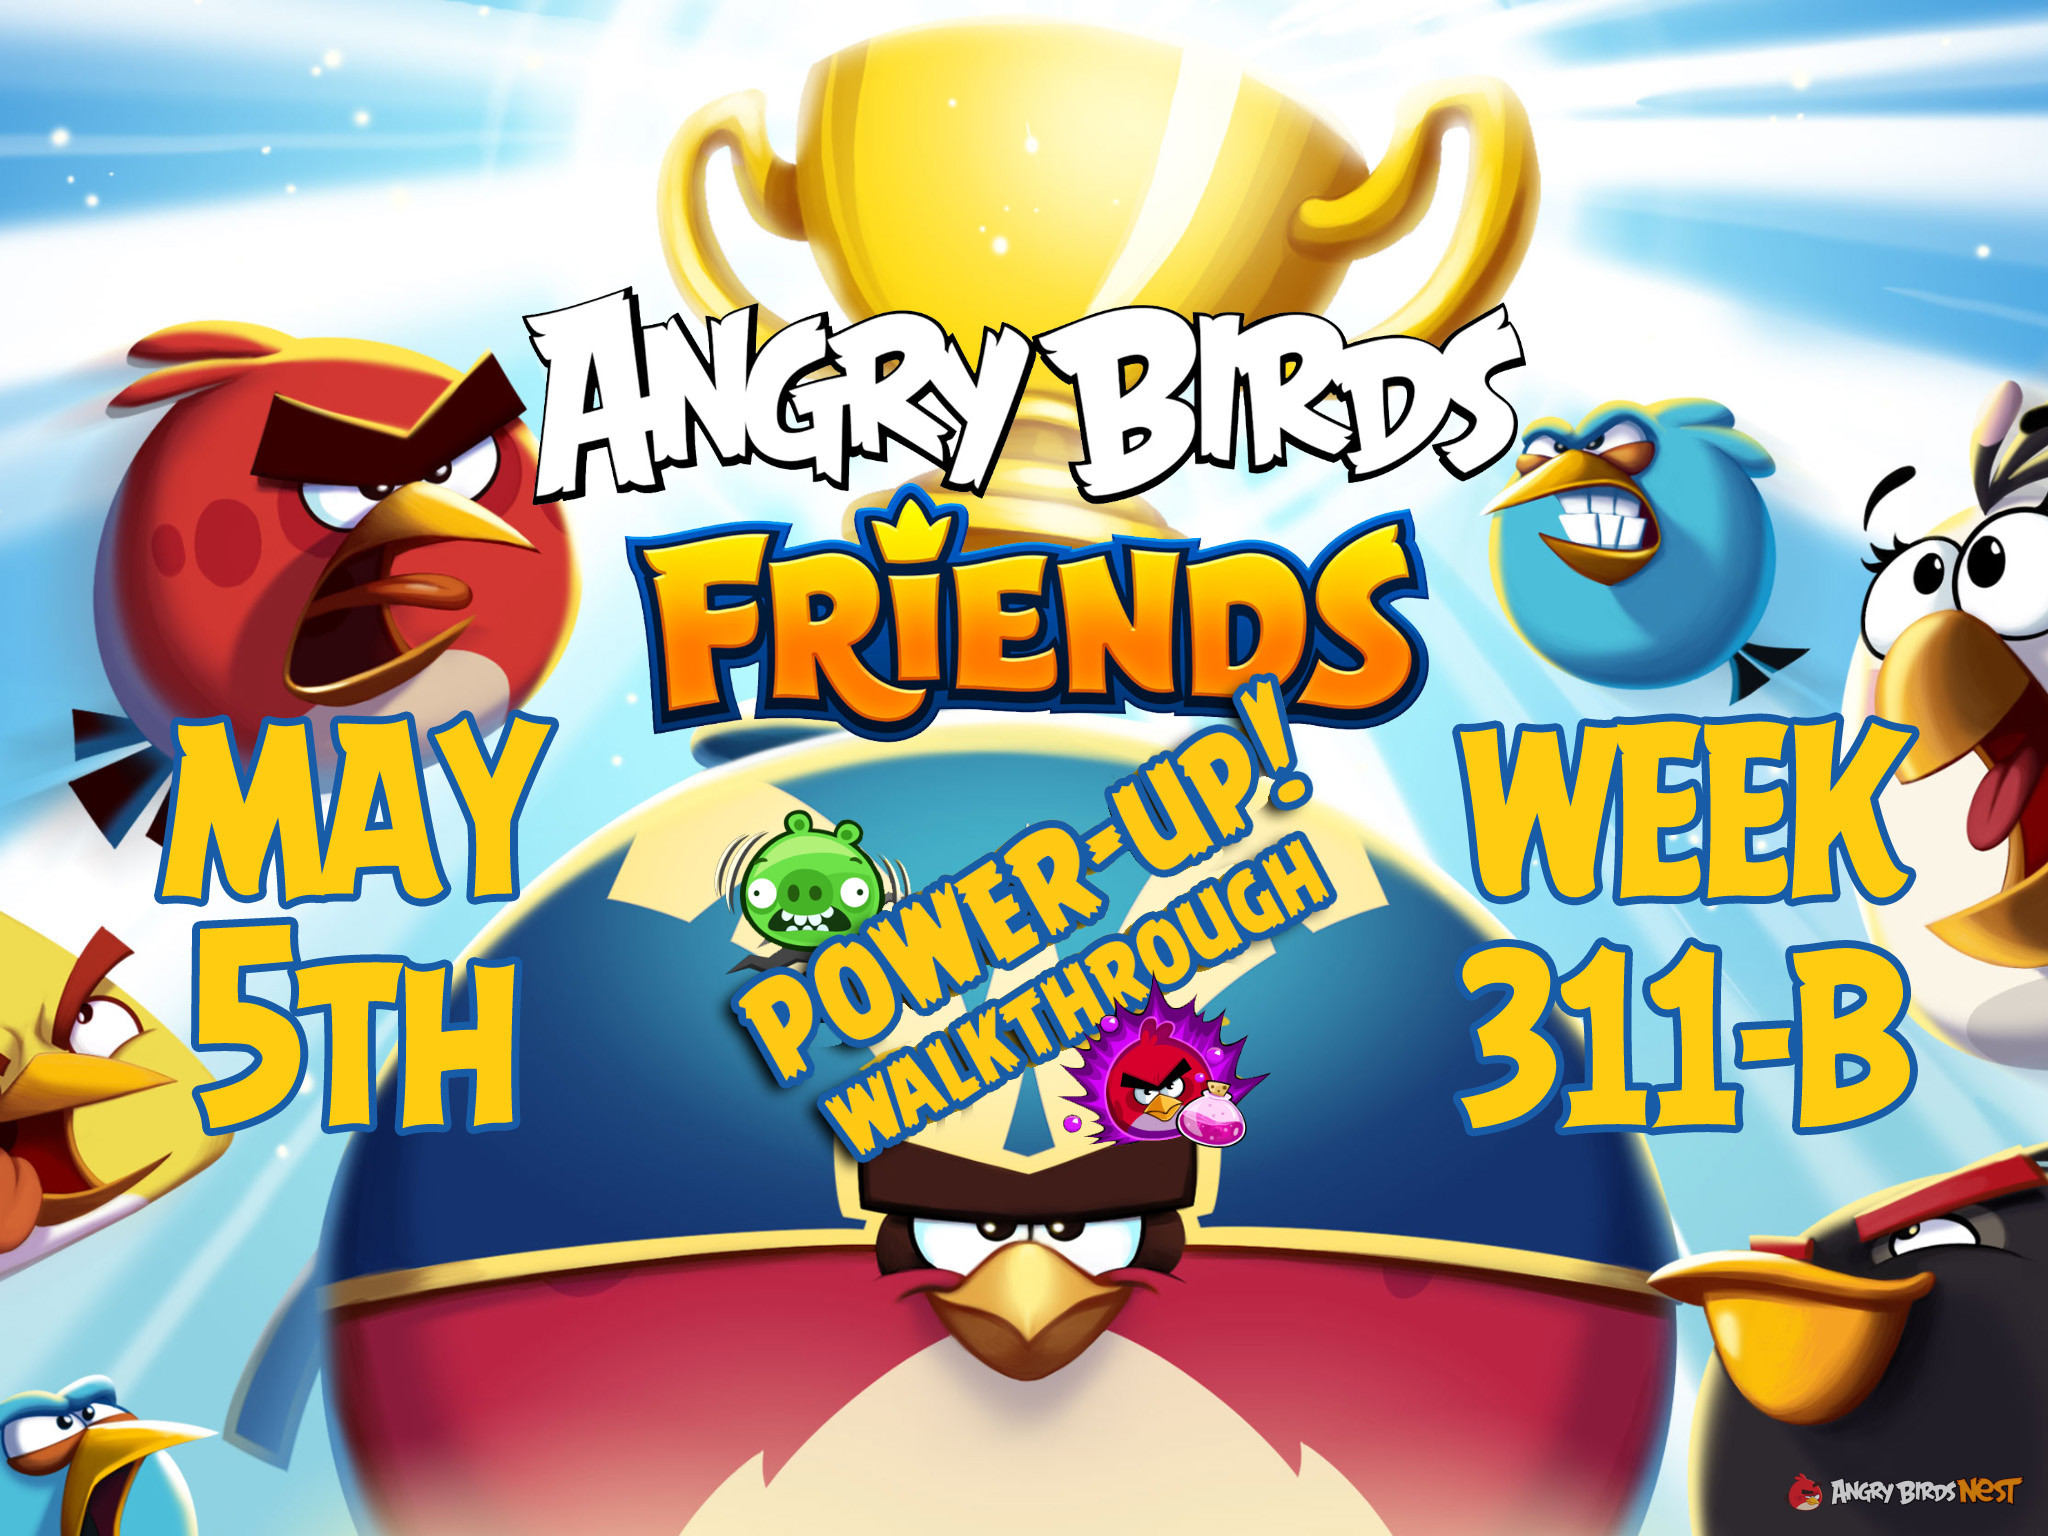 Angry Birds Friends Tournament Week 311-B Feature Image PU